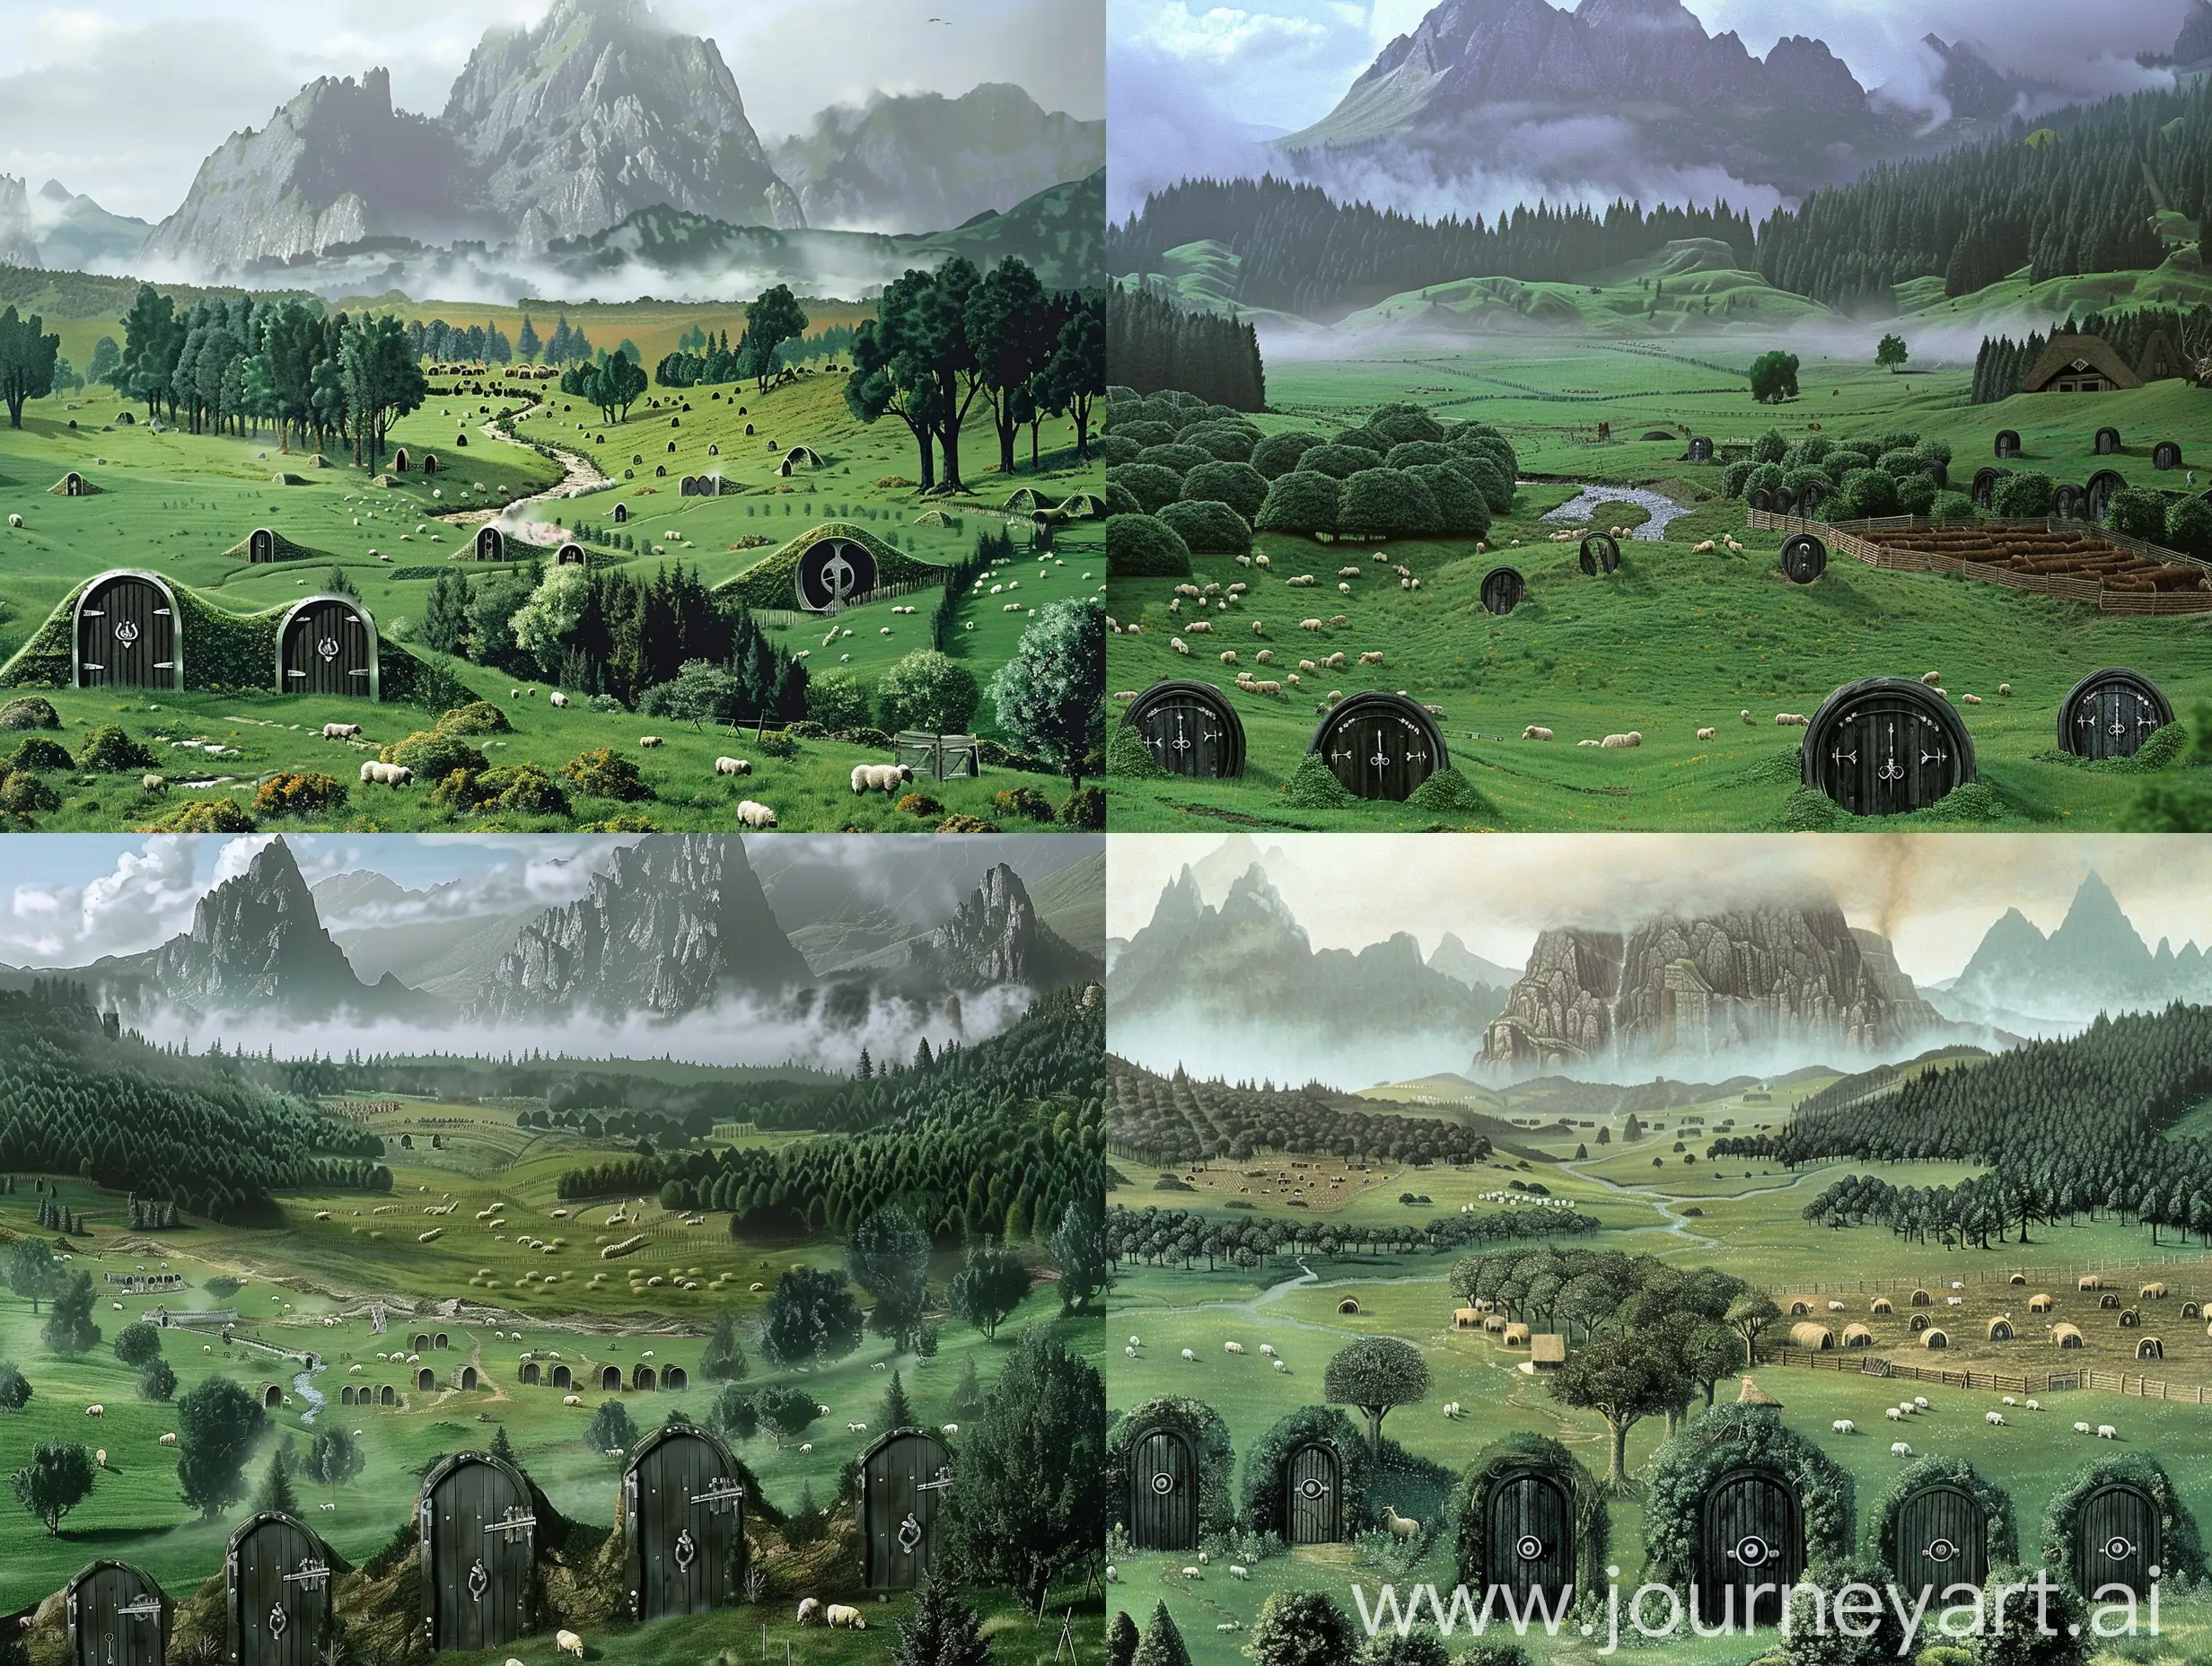 dvd screenshot of 1987 Dark Souls fantasy film Illustrated. In a large green field, with a wide variety of trees, at various elevations in the fields, dens with dark oak doors in detail, with silver handles. Some plantations in the fields, and streams. Pens full of sheep and pigs on the other side of the field. In the background large mountains with large peaks covered by clouds. Foggy weather.